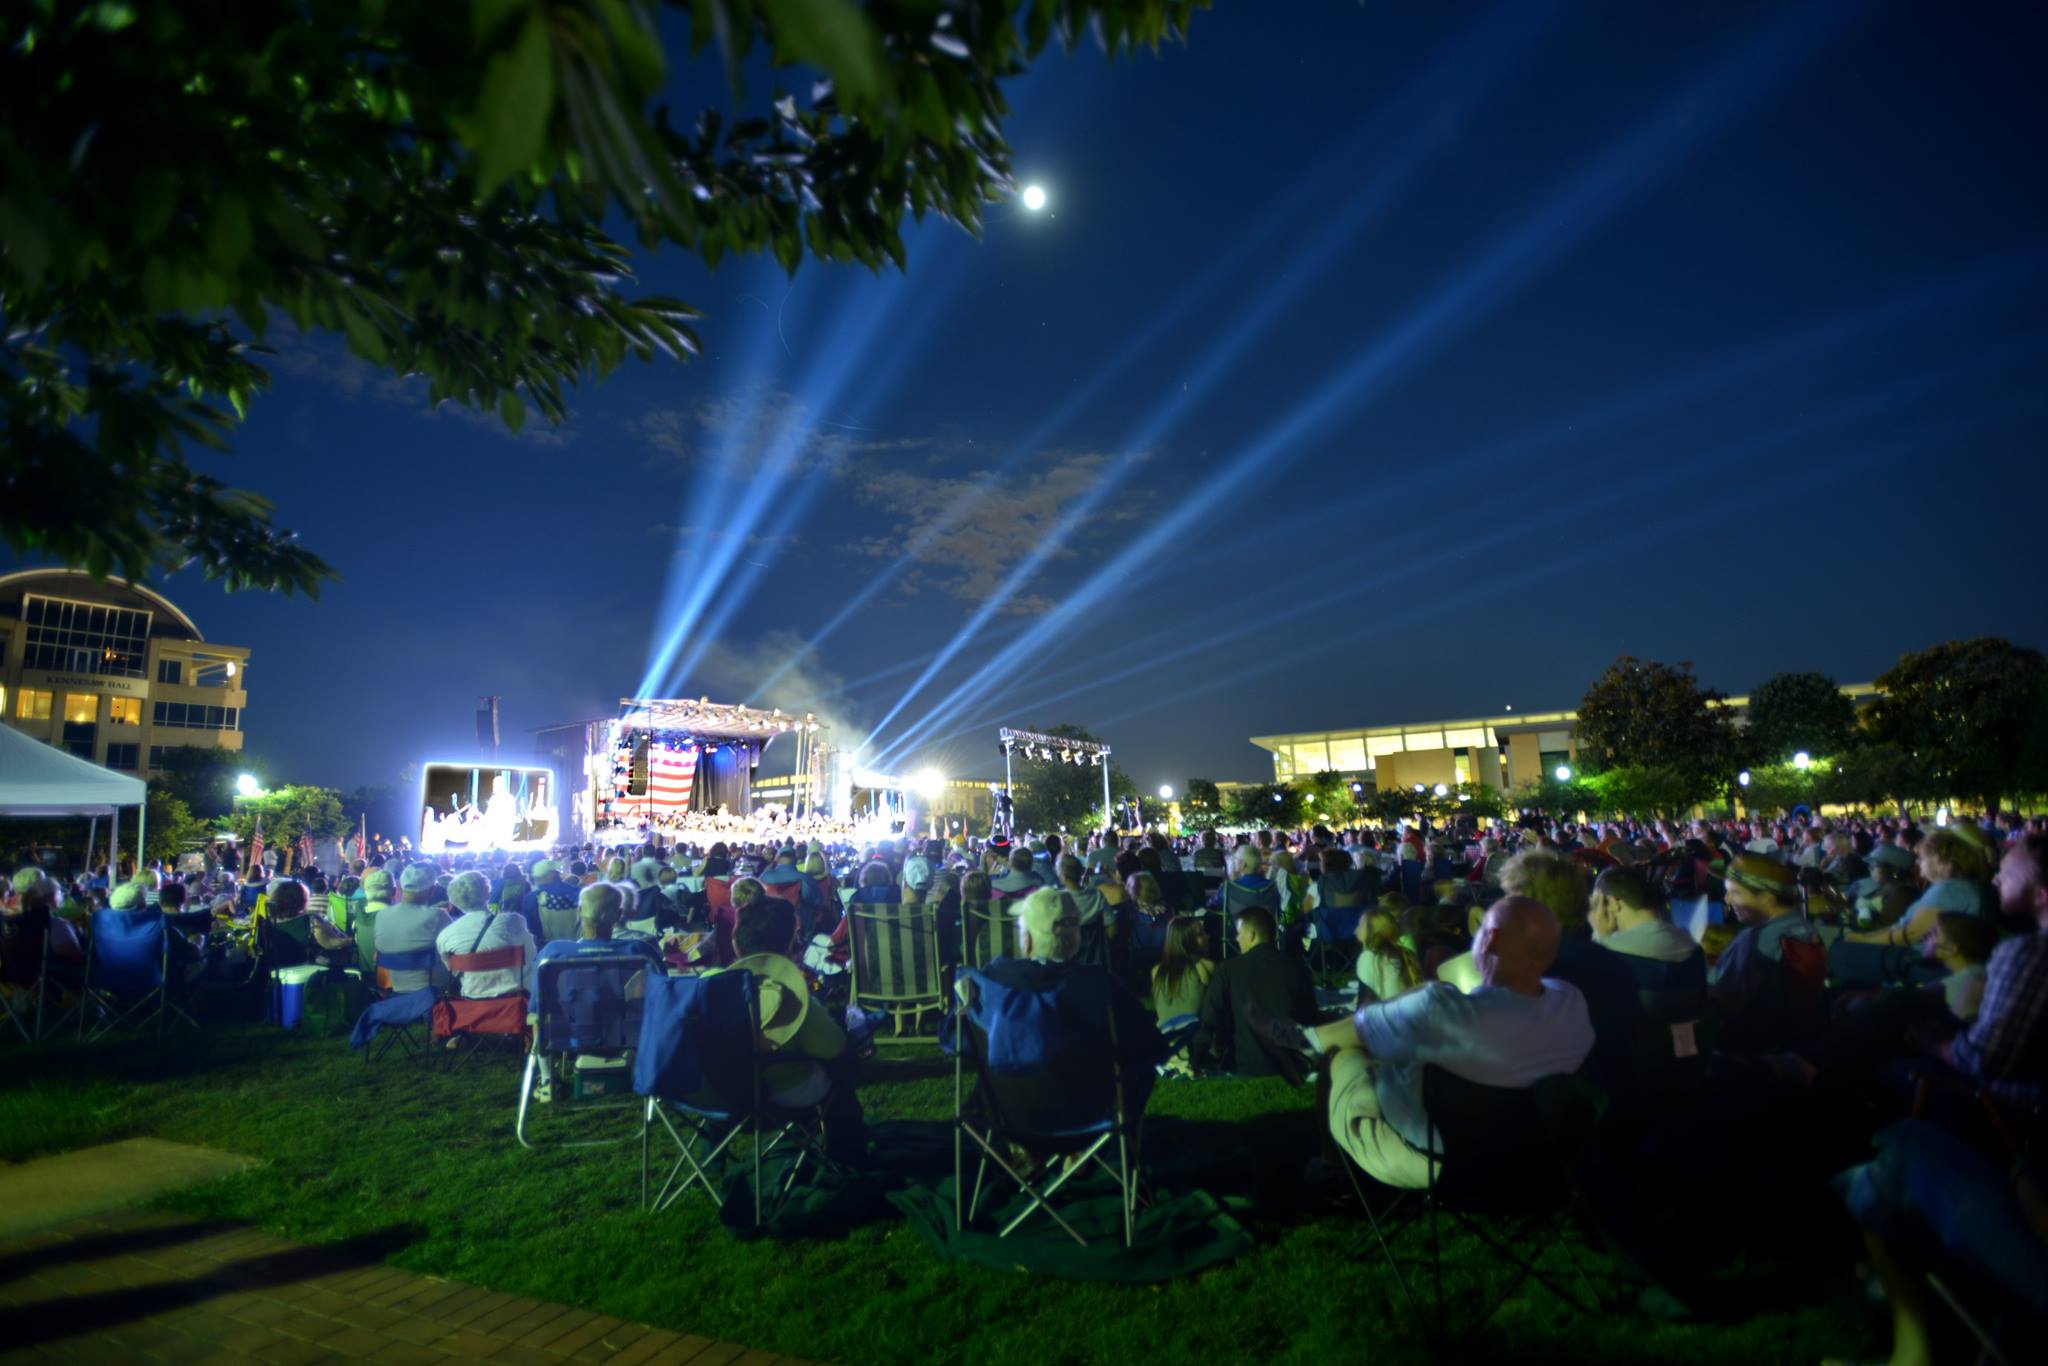 Annual concert and fireworks returns